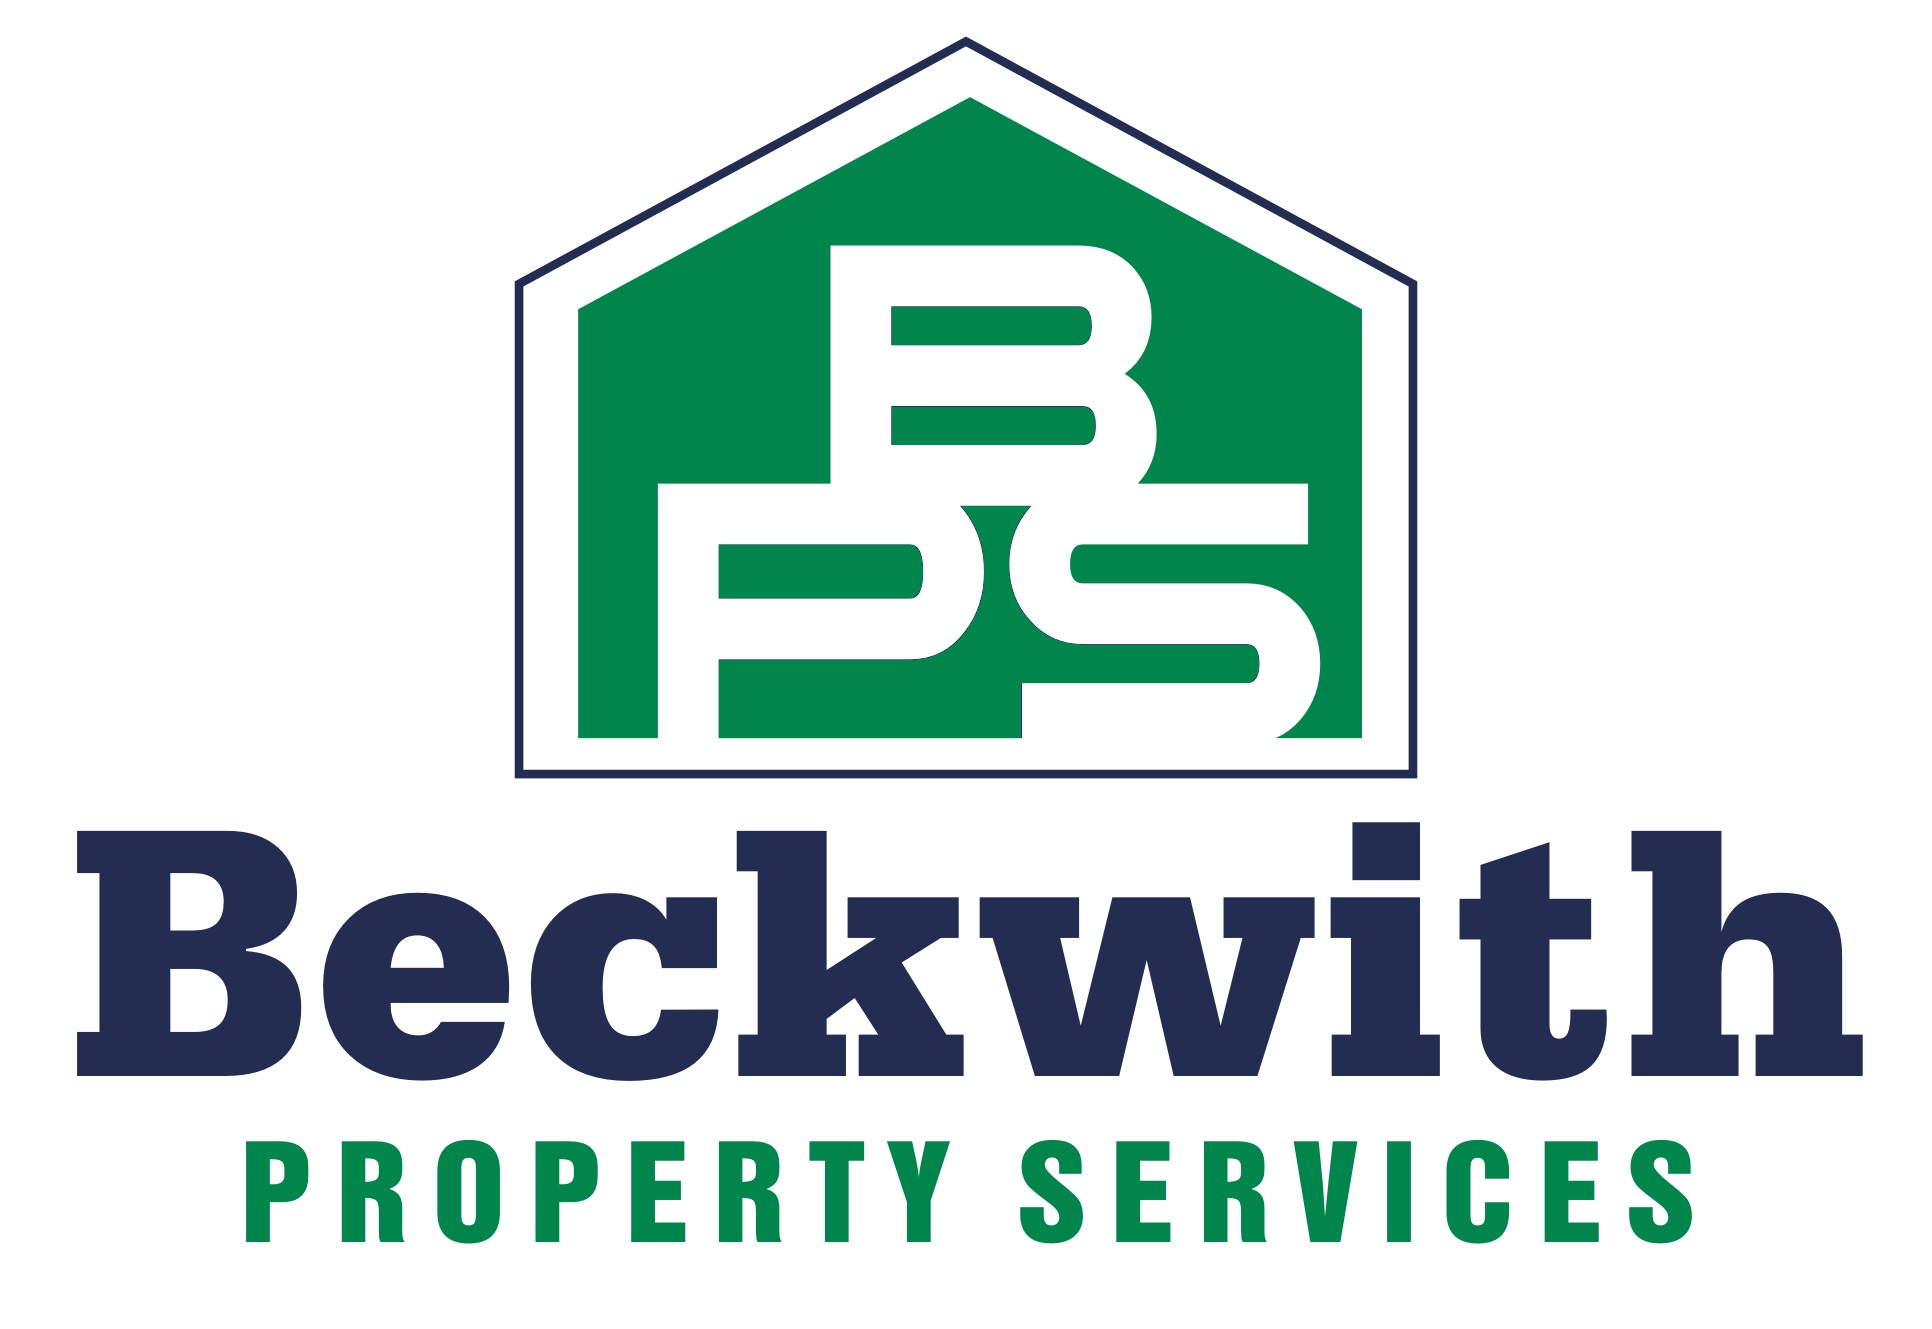 Beckwith Property Services LLC logo